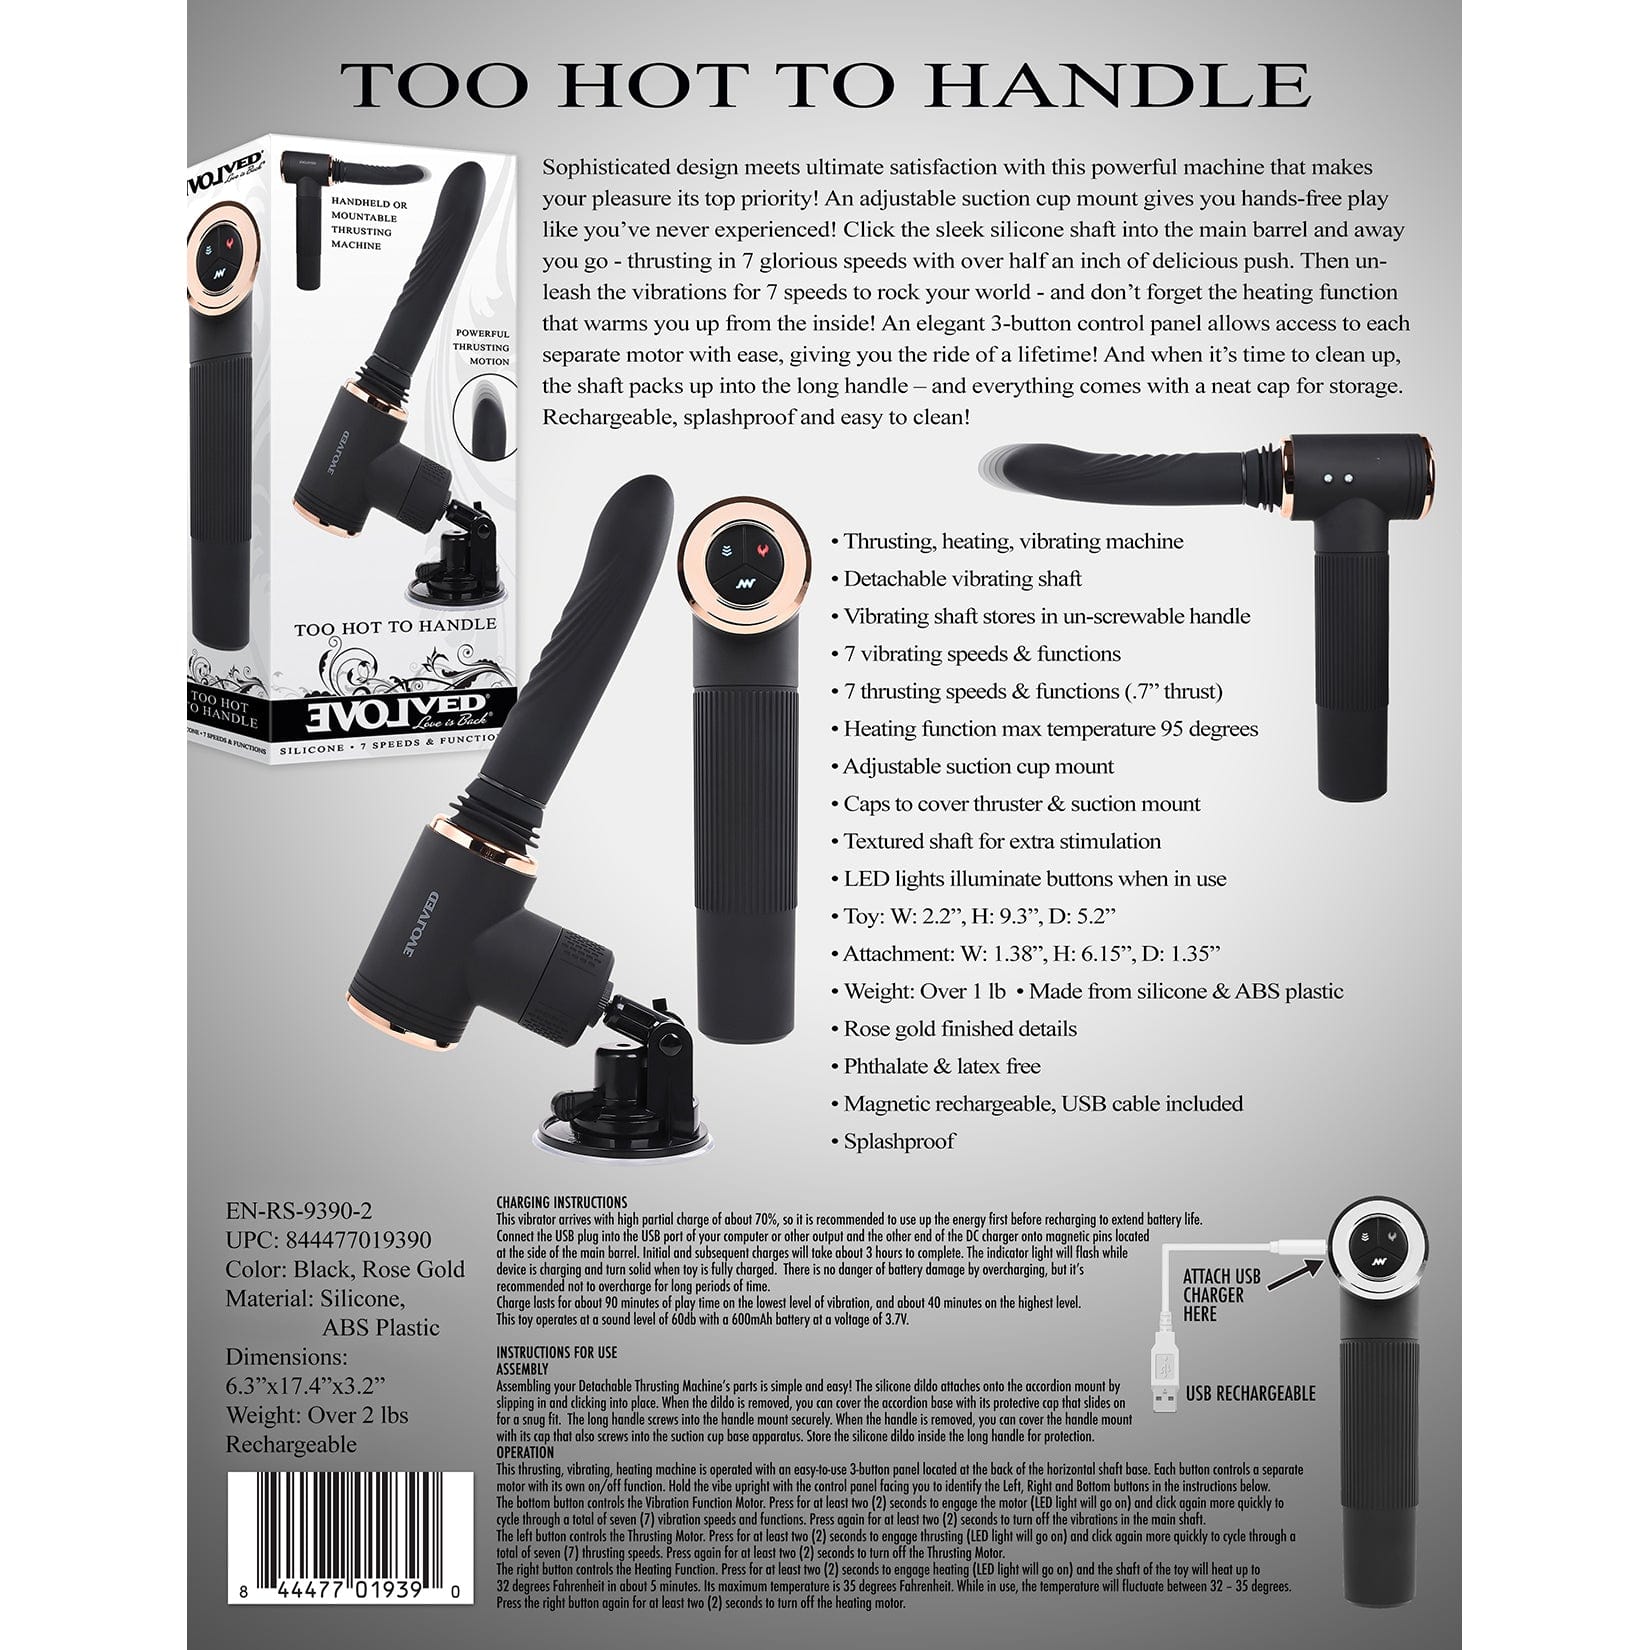 Evolved - Too Hot to Handle Mountable Thursting Sex Machine (Black) Non Realistic Dildo w/o suction cup (Vibration) Rechargeable 844477019390 CherryAffairs